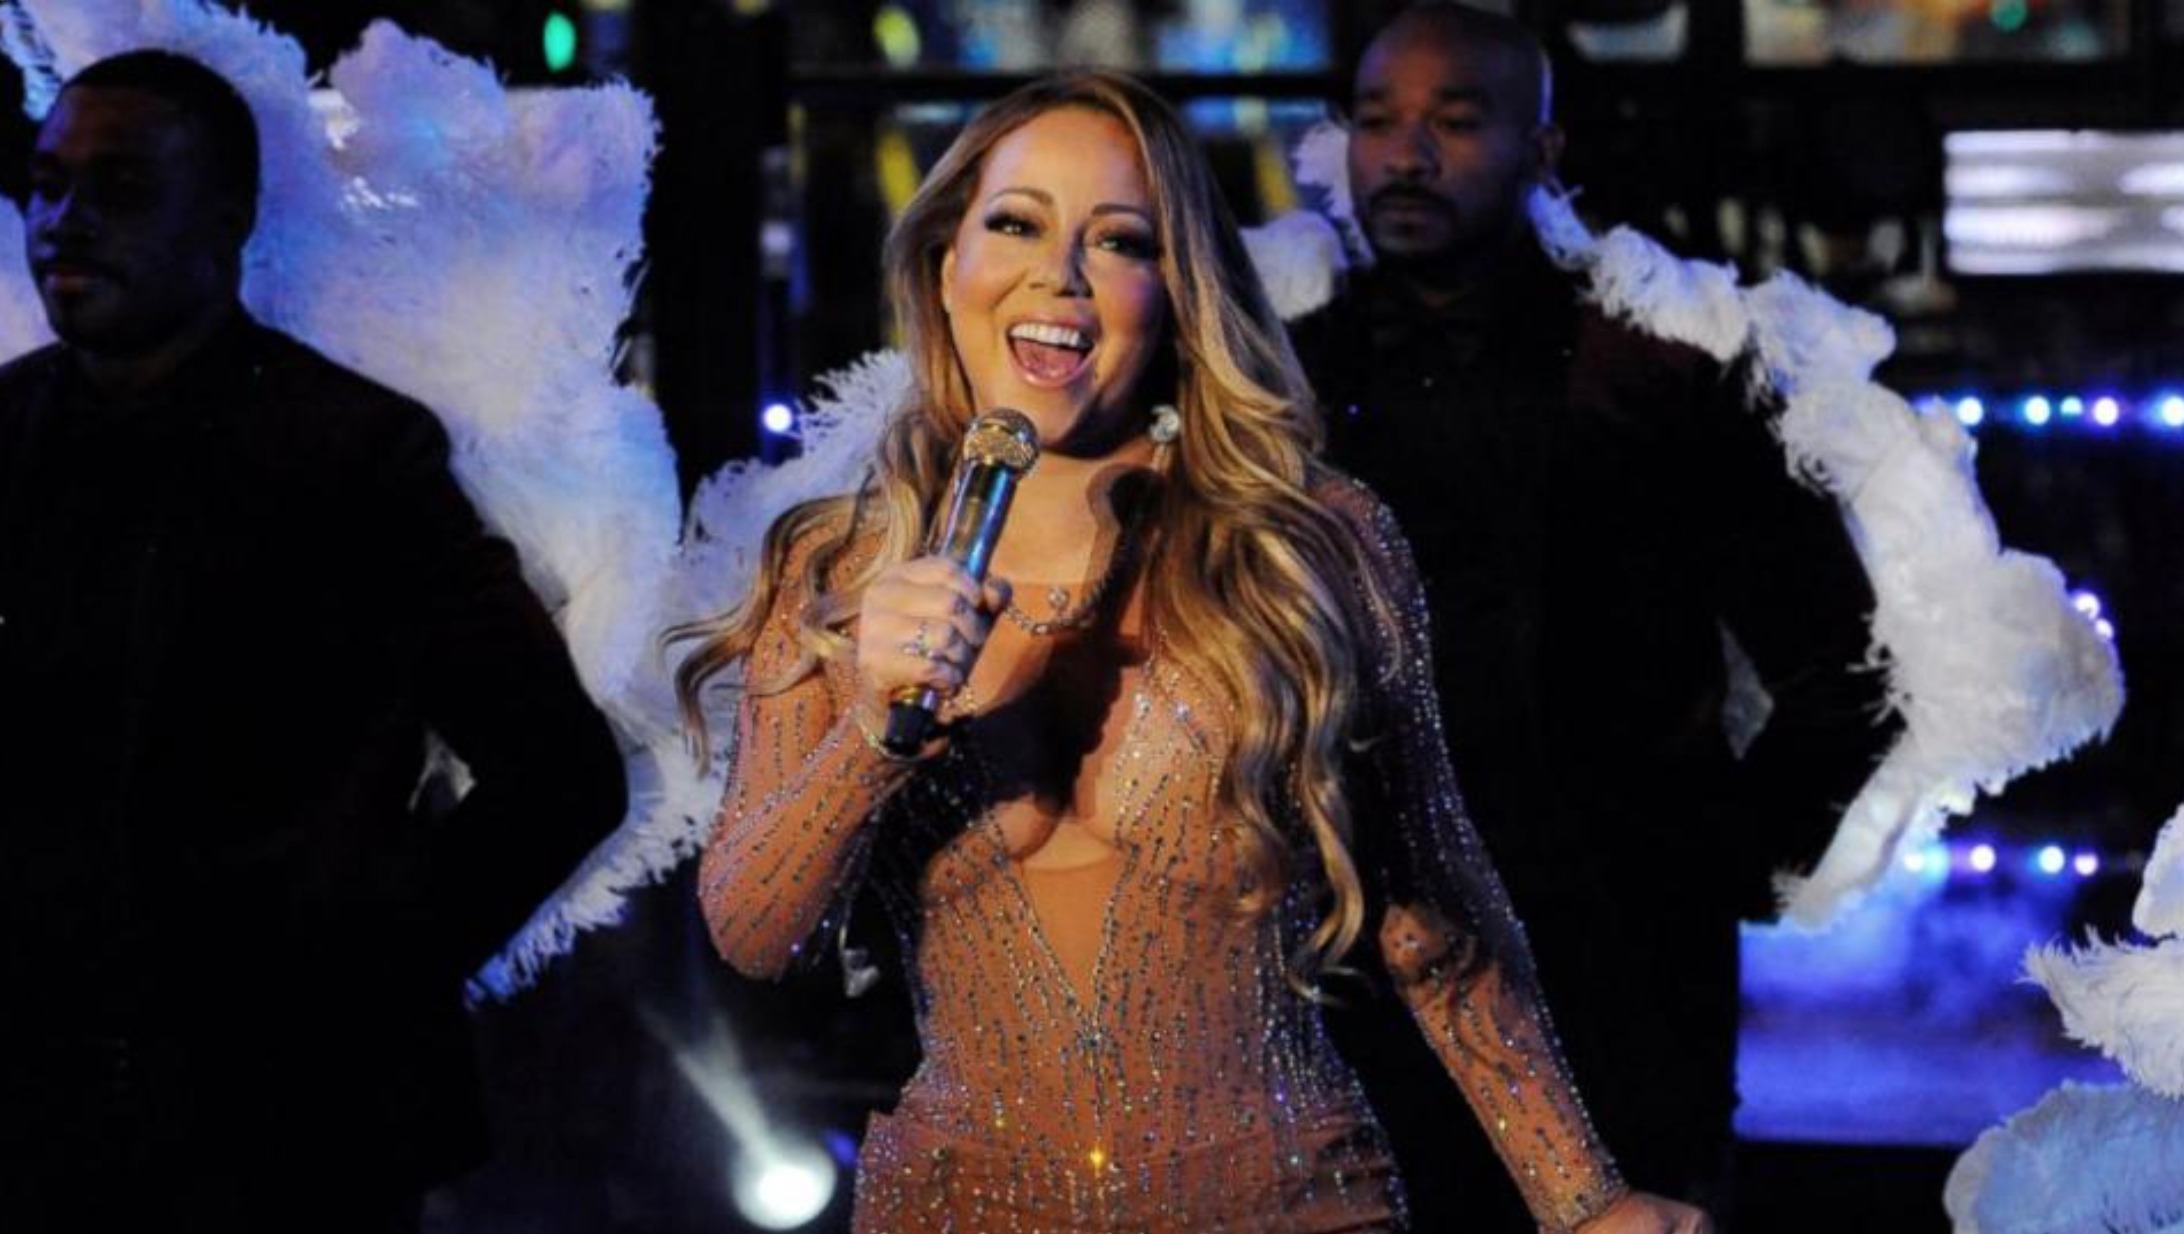 Mariah Careys New Years Eve Performance Was Pathetic So Was The Sexist Response Palmer Report 